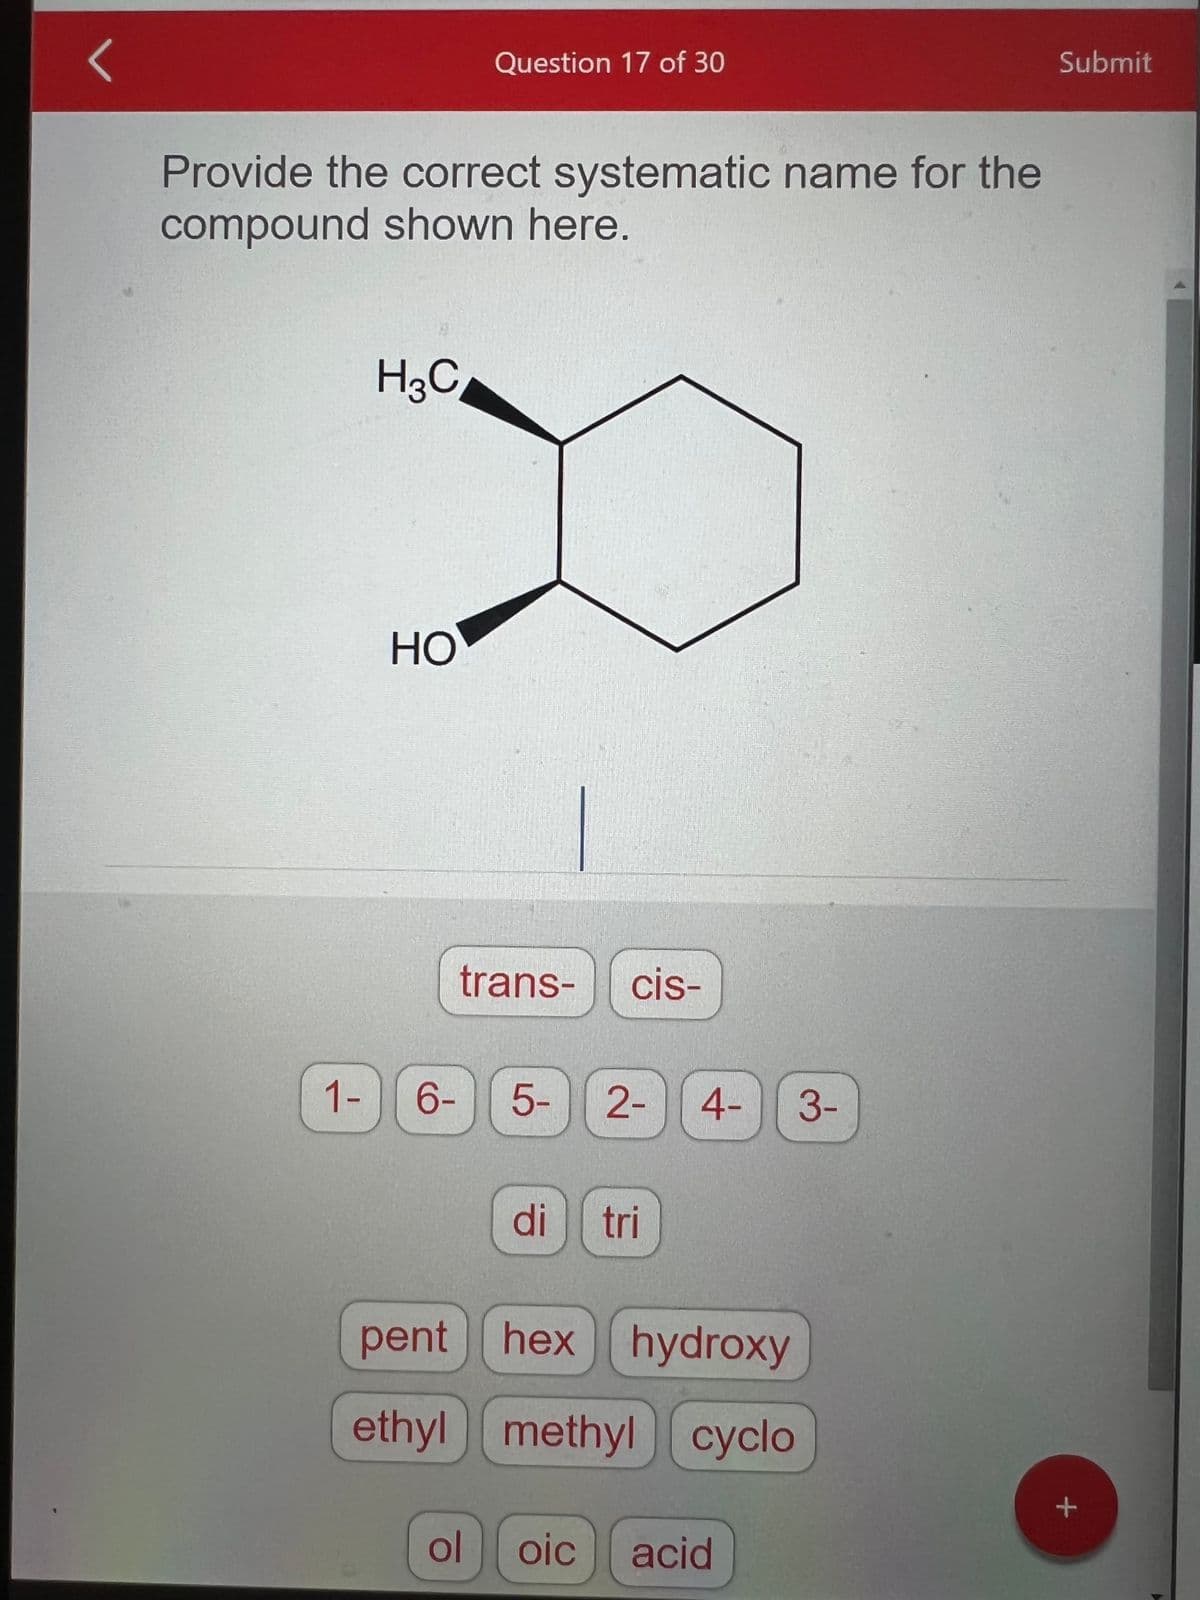 Provide the correct systematic name for the
compound shown here.
1-
-
H3C
HO
Question 17 of 30
trans- cis-
6-
ol
5-
di
2- 4-
tri
pent hex hydroxy
ethyl
methyl cyclo
oic acid
3-
Submit
+